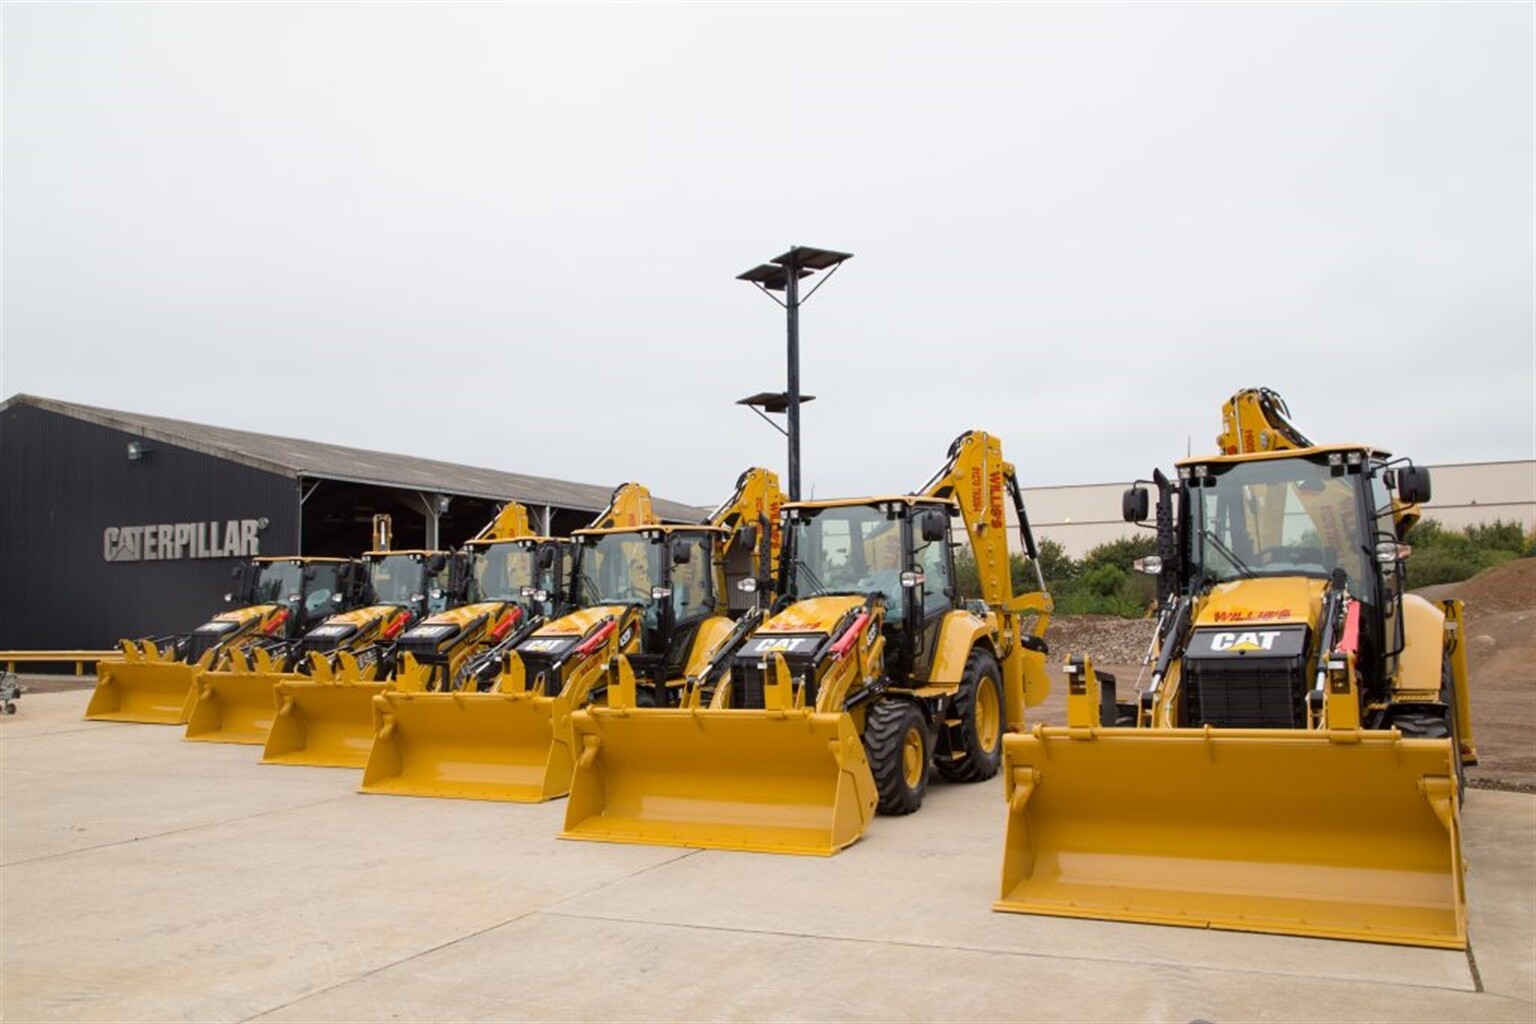 14 new Cat machines led by 6 backhoe loaders in Willis Brothers fleet deal